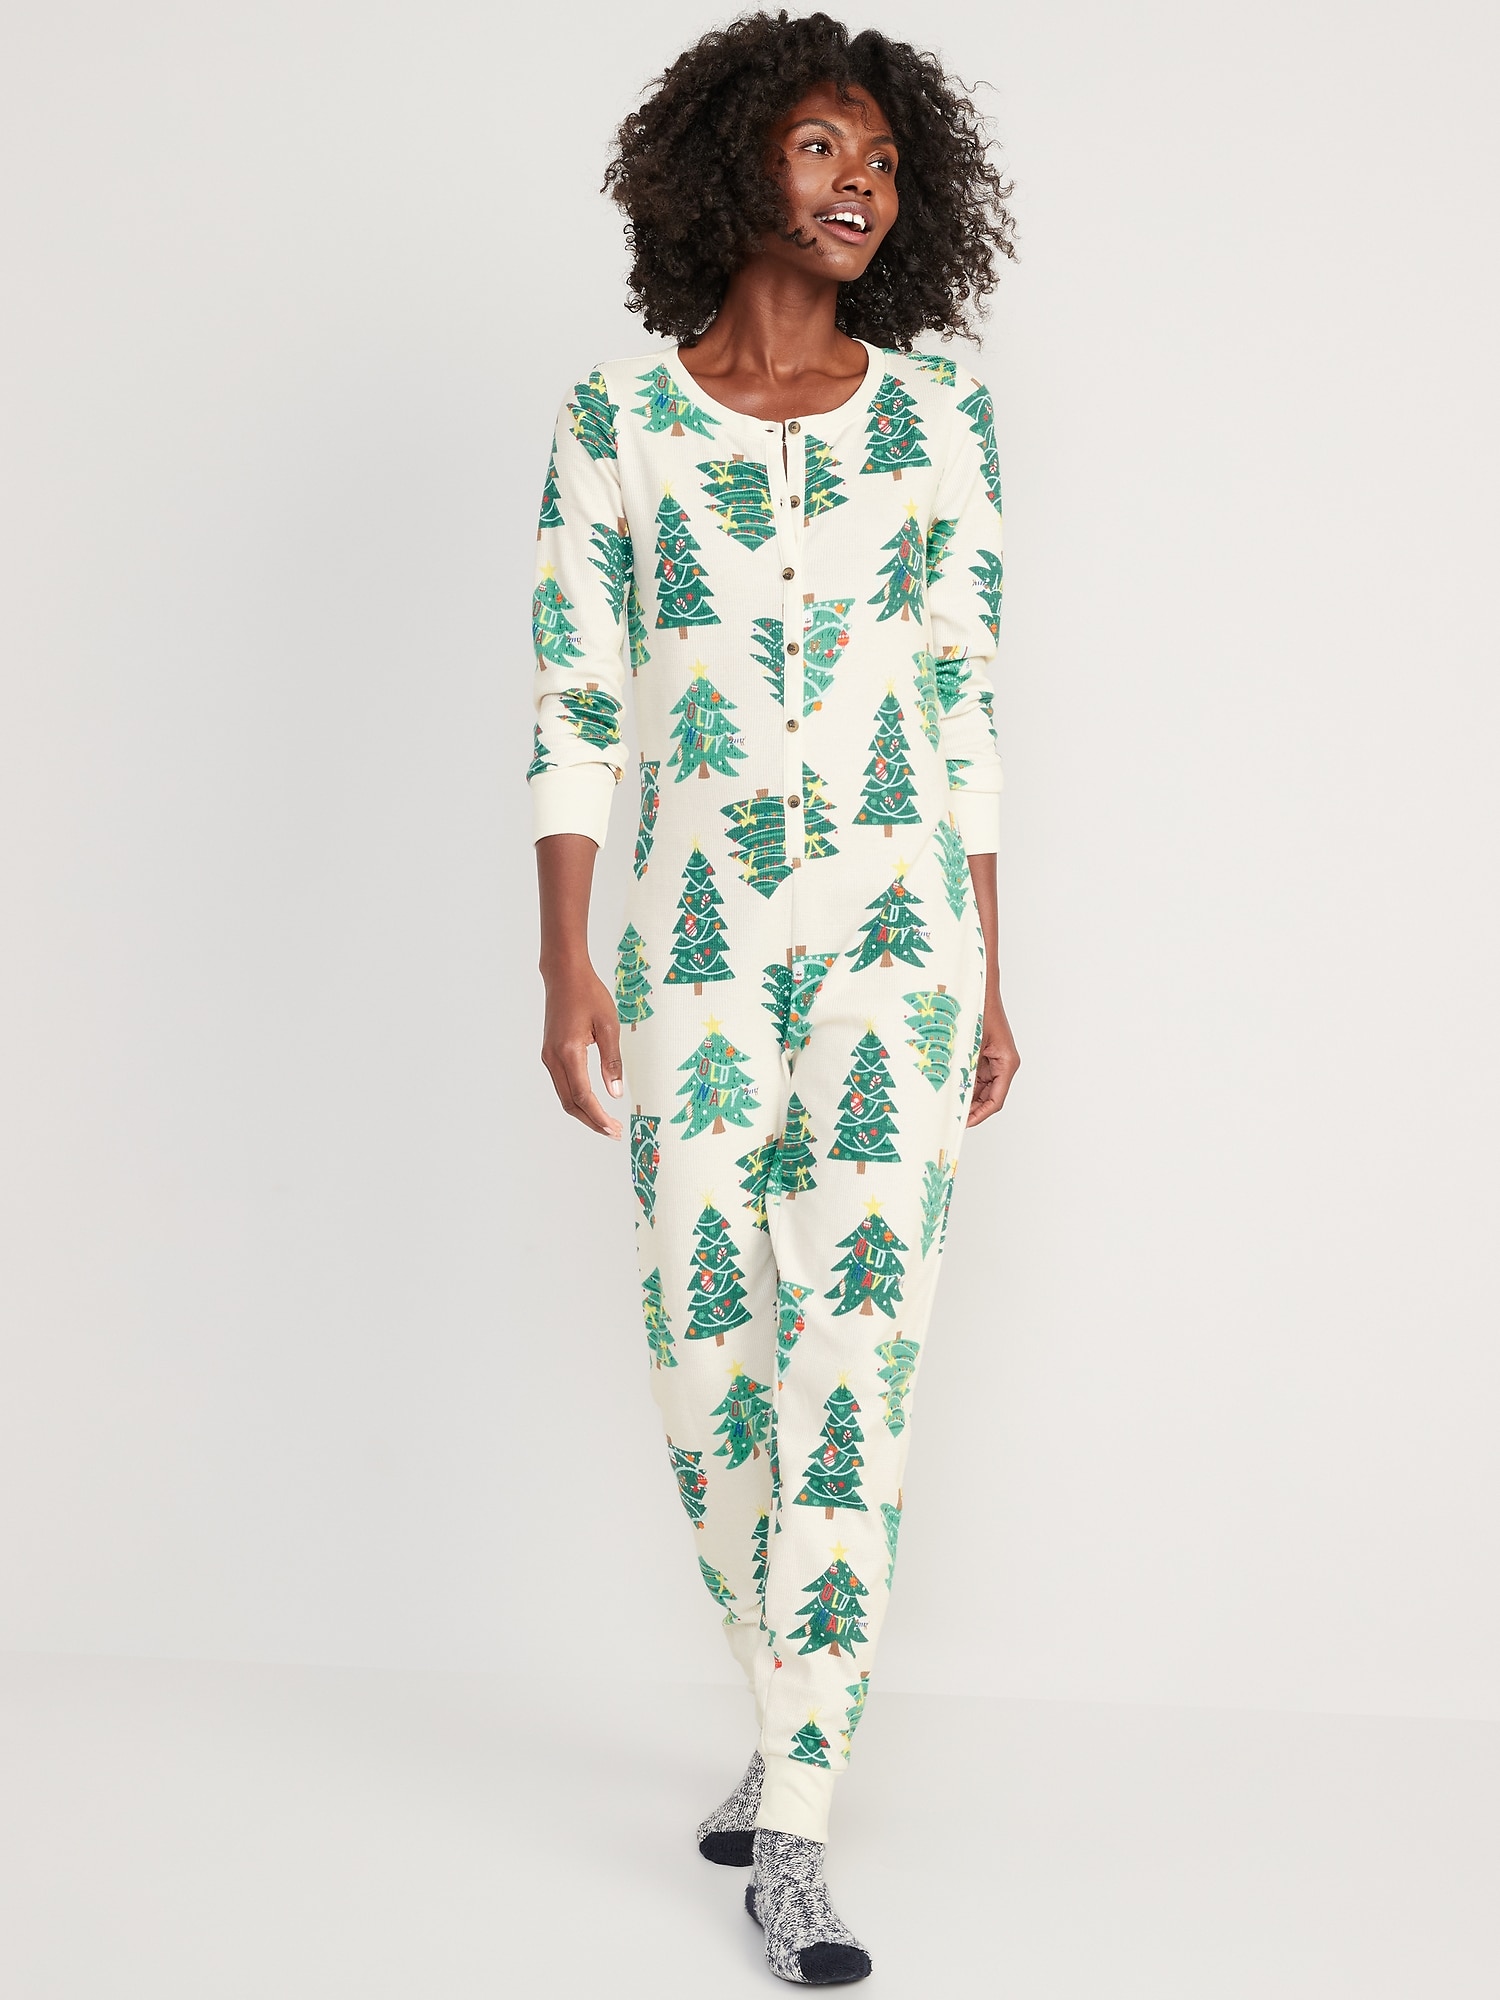 Oldnavy Matching Printed Thermal-Knit One-Piece Pajamas for Women